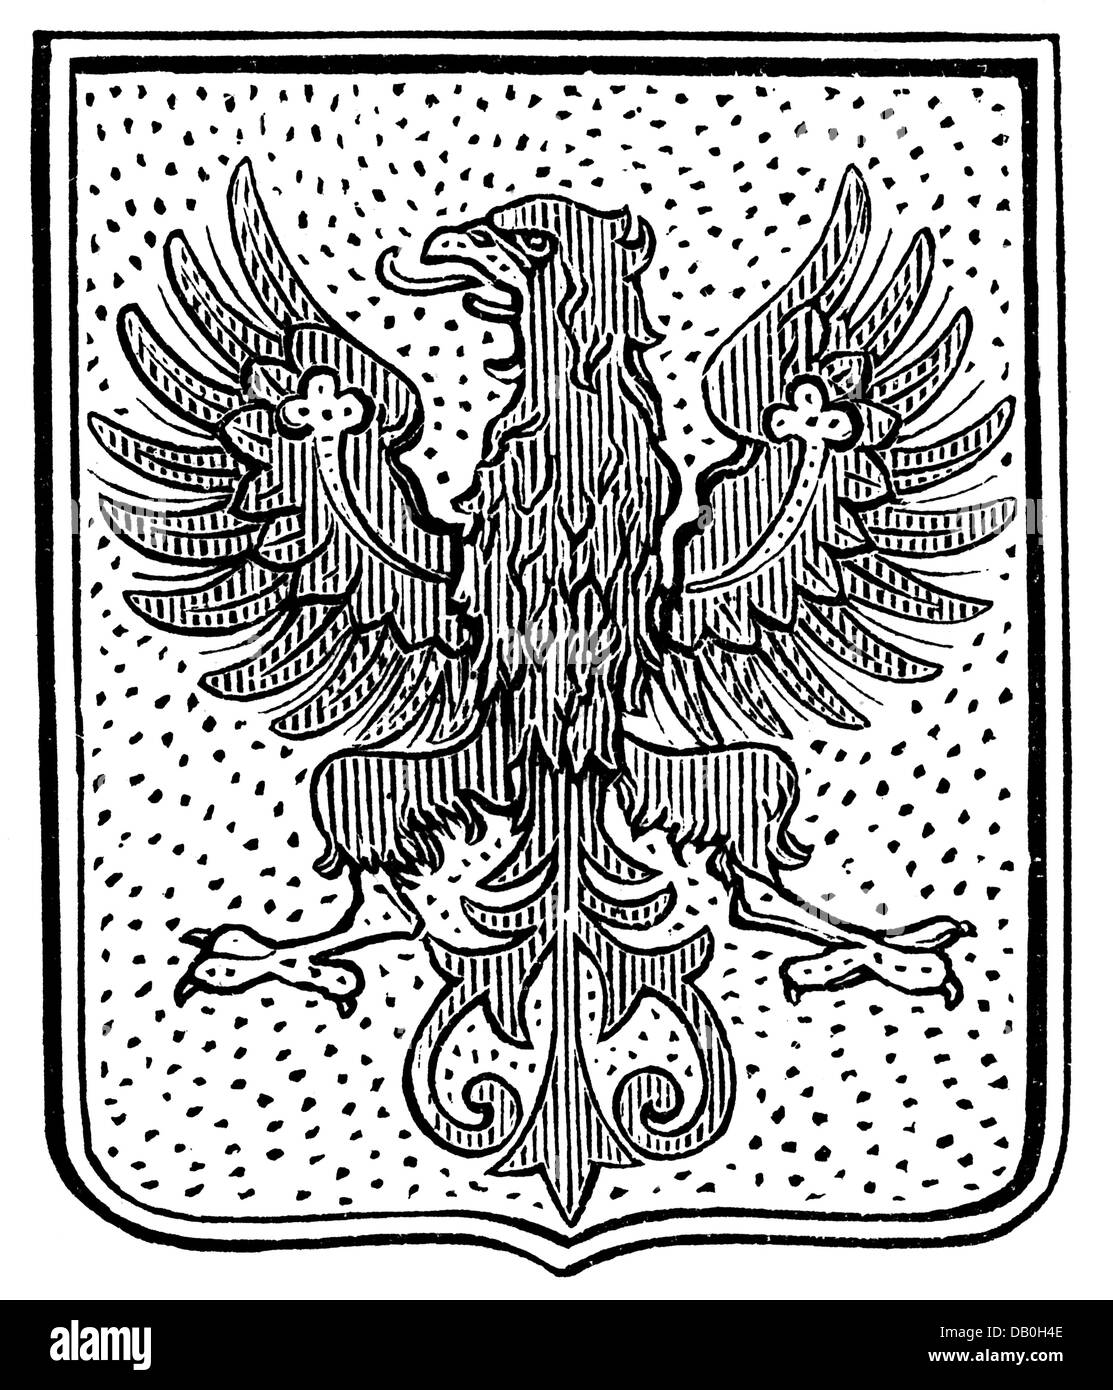 heraldry, coat of arms, Germany, city arms, Potsdam, wood engraving, 1875, Additional-Rights-Clearences-Not Available Stock Photo